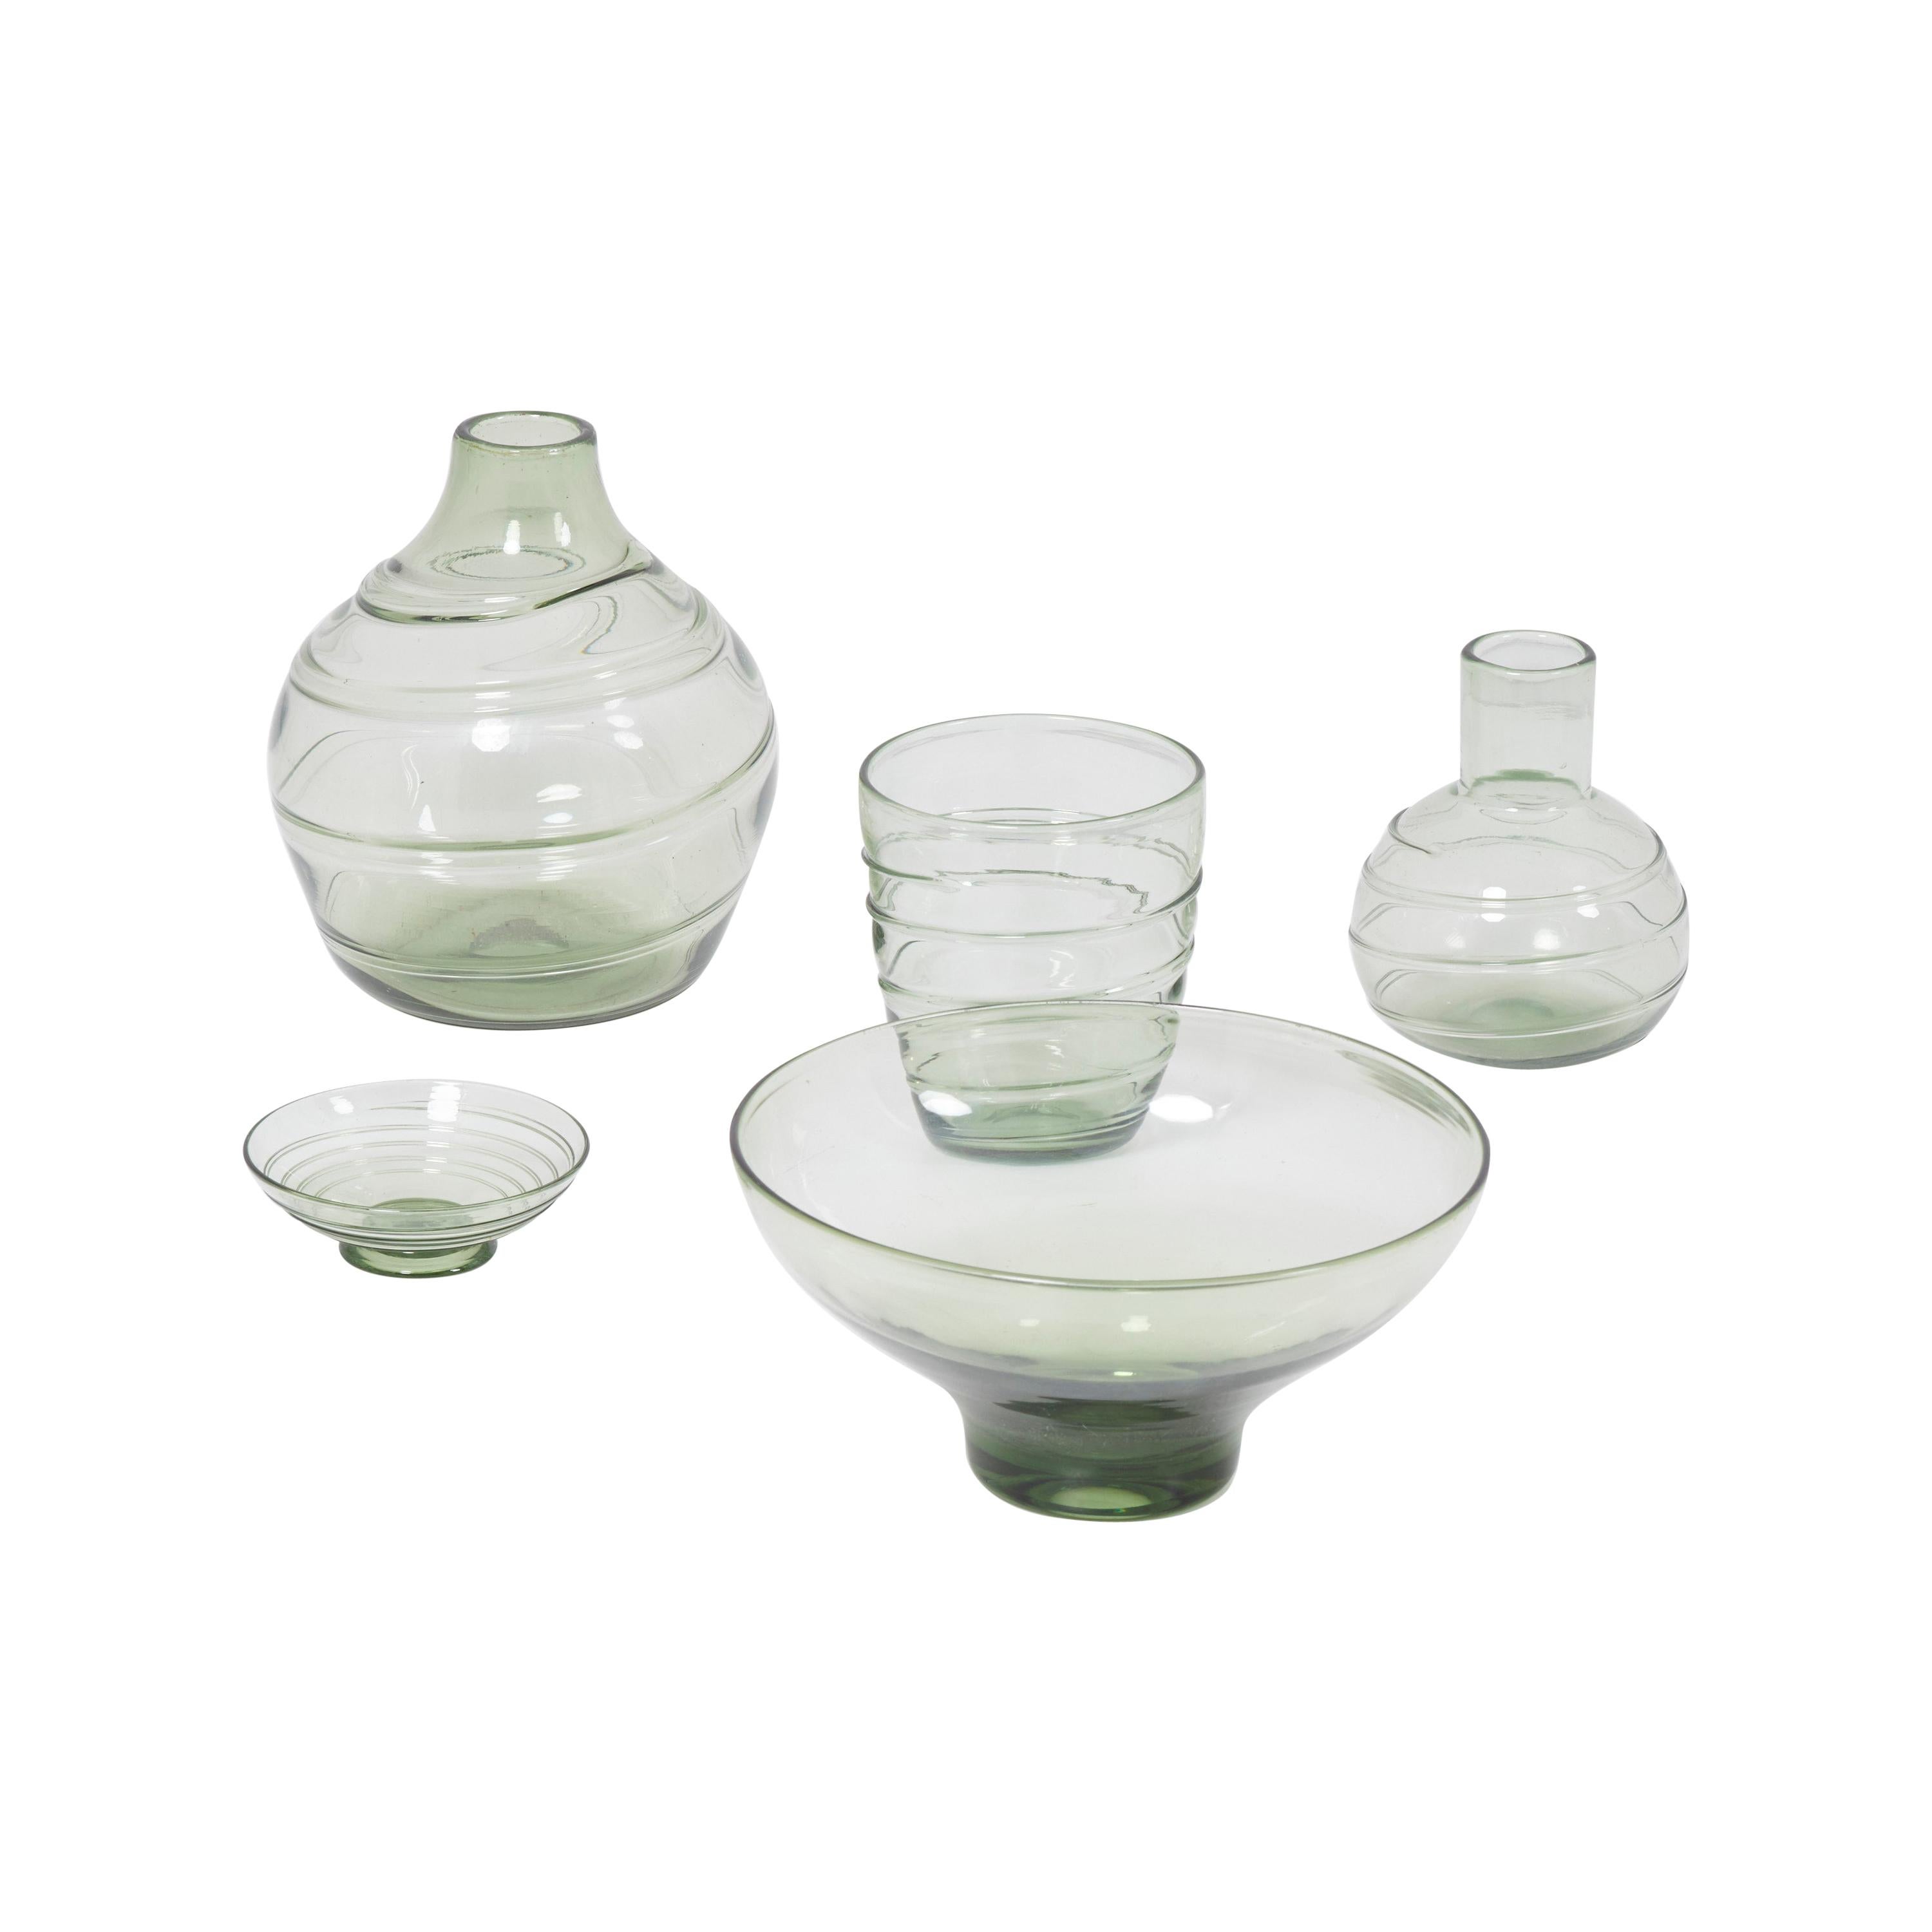 Set of 5 Ribbon-Trailed Glass Vases and Bowls by Barnaby Powell for Whitefriars